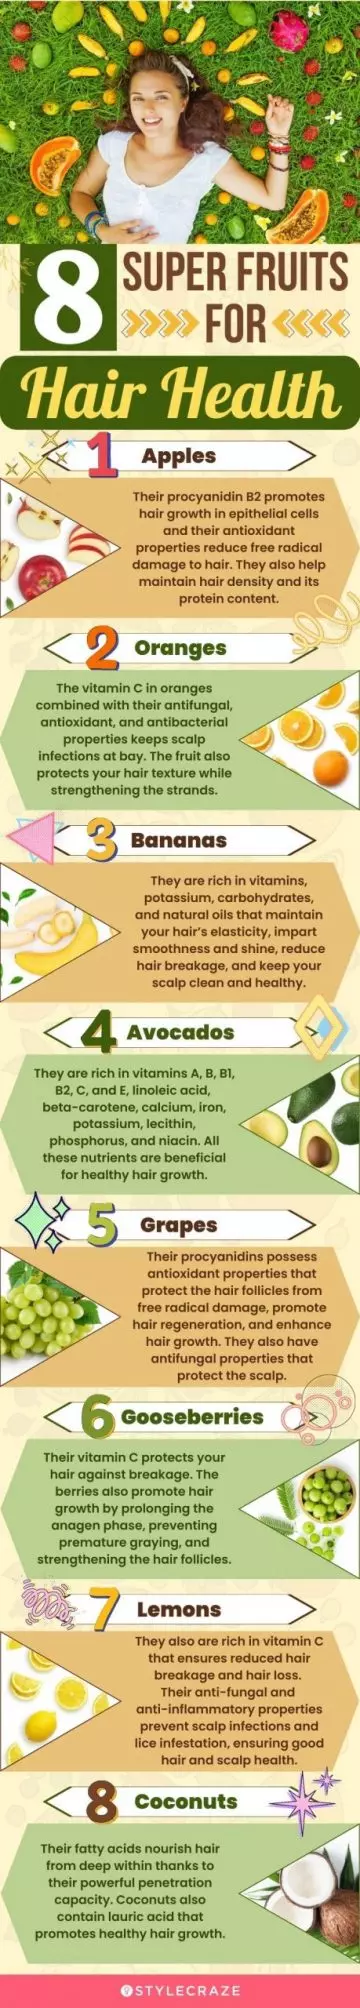 8 super fruits for hair health (infographic)